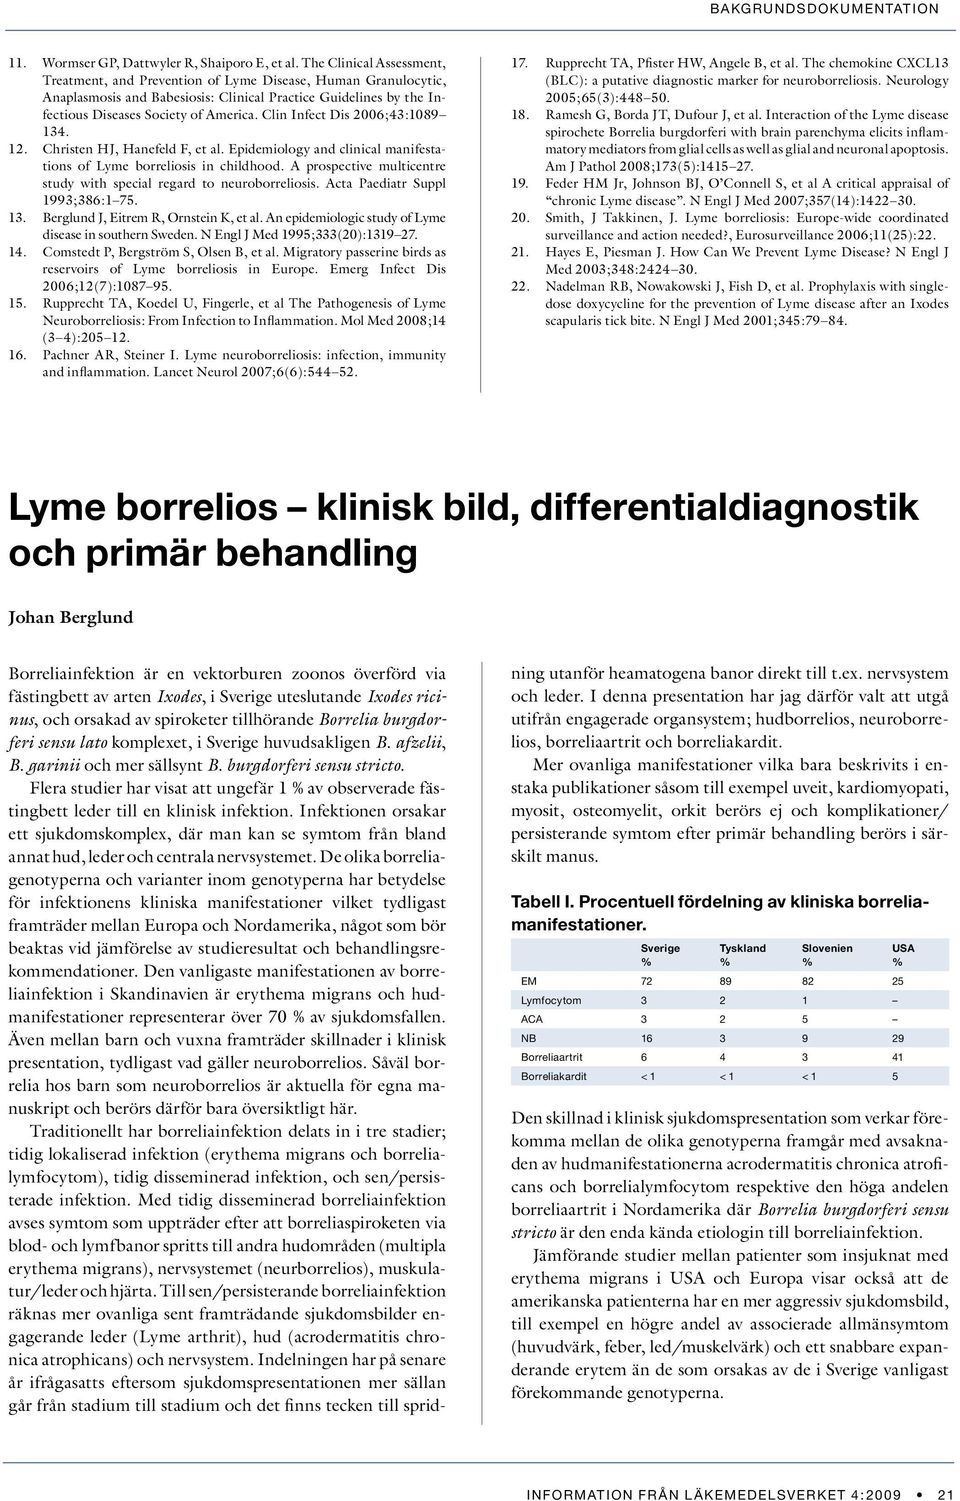 Clin Infect Dis 2006;43:1089 134. Christen HJ, Hanefeld F, et al. Epidemiology and clinical manifestations of Lyme borreliosis in childhood.